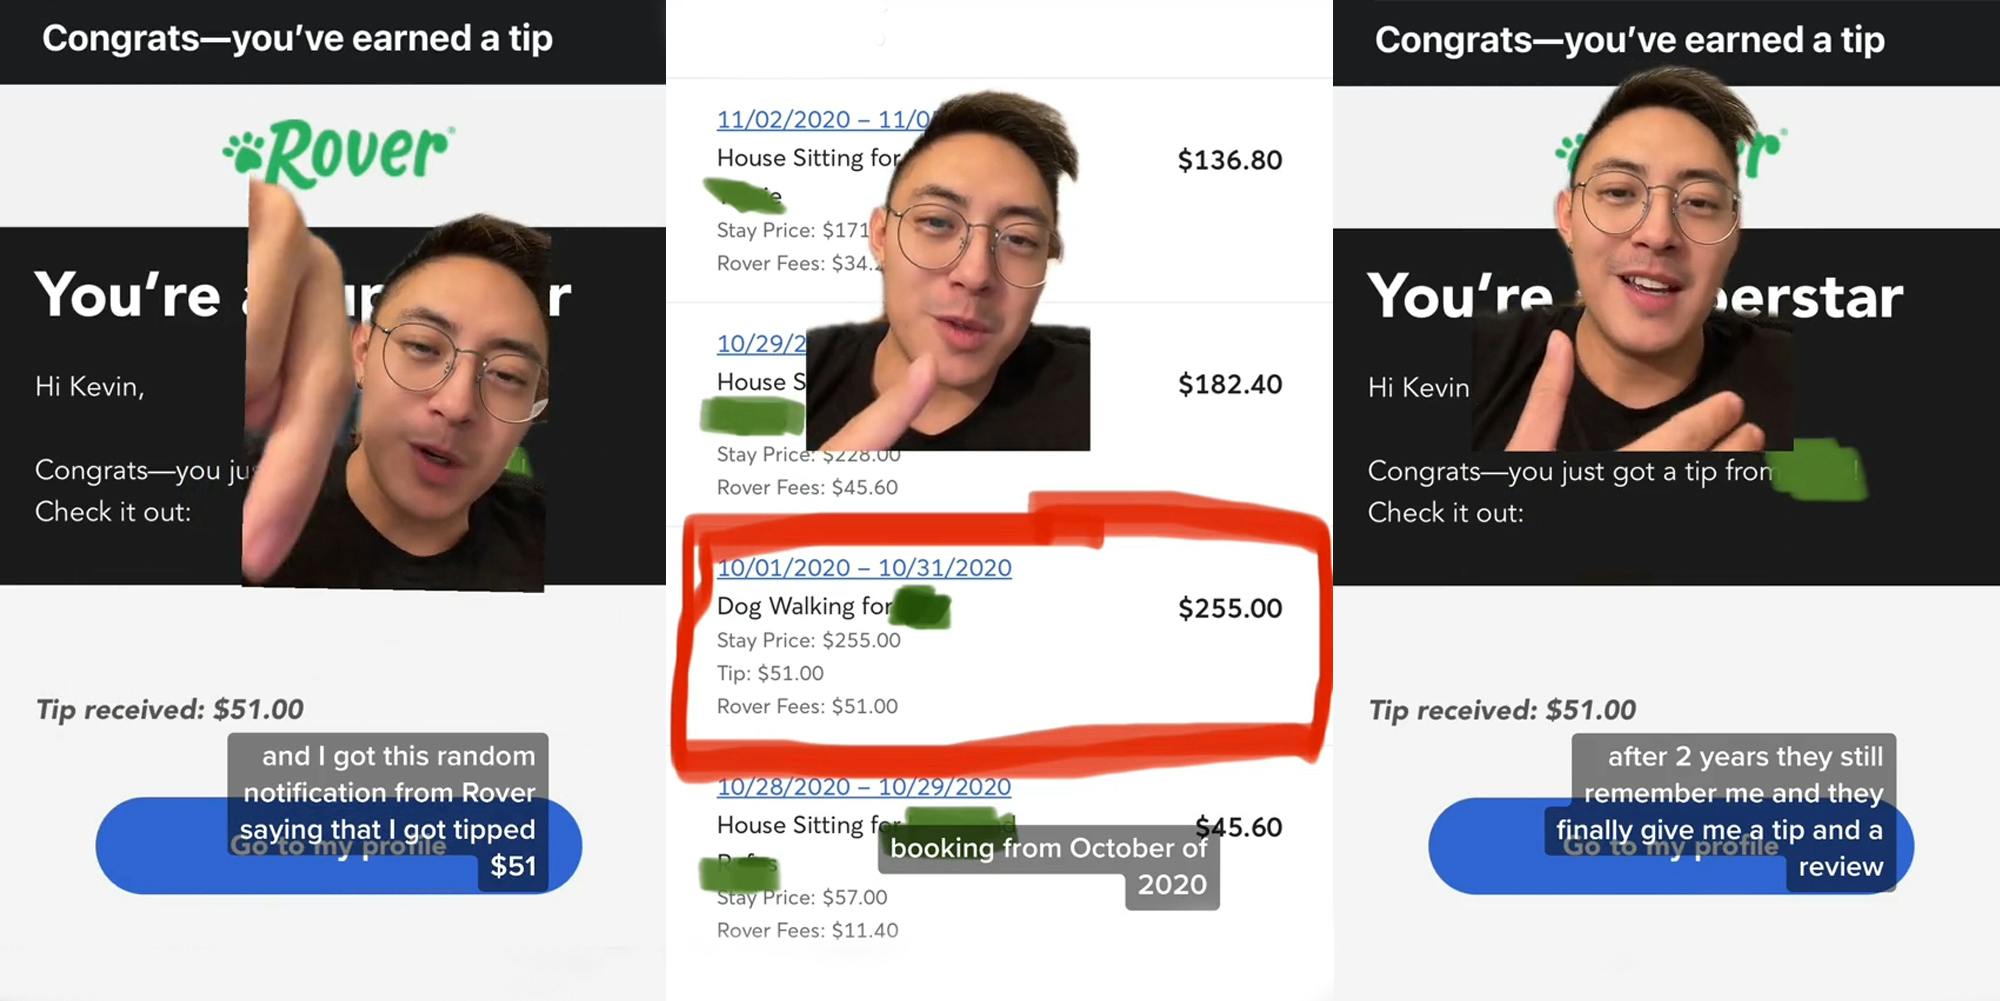 man greenscreen TikTok over Rover tip received with caption "and I got this random notification from Rover saying I got tipped $51" (l) man greenscreen TikTok over payment history with one circled in red with caption "booking from October 2020" (c) man greenscreen TikTok over Rover tip with caption "after 2 years they still remember me and they finally give me a tip and review" (r)